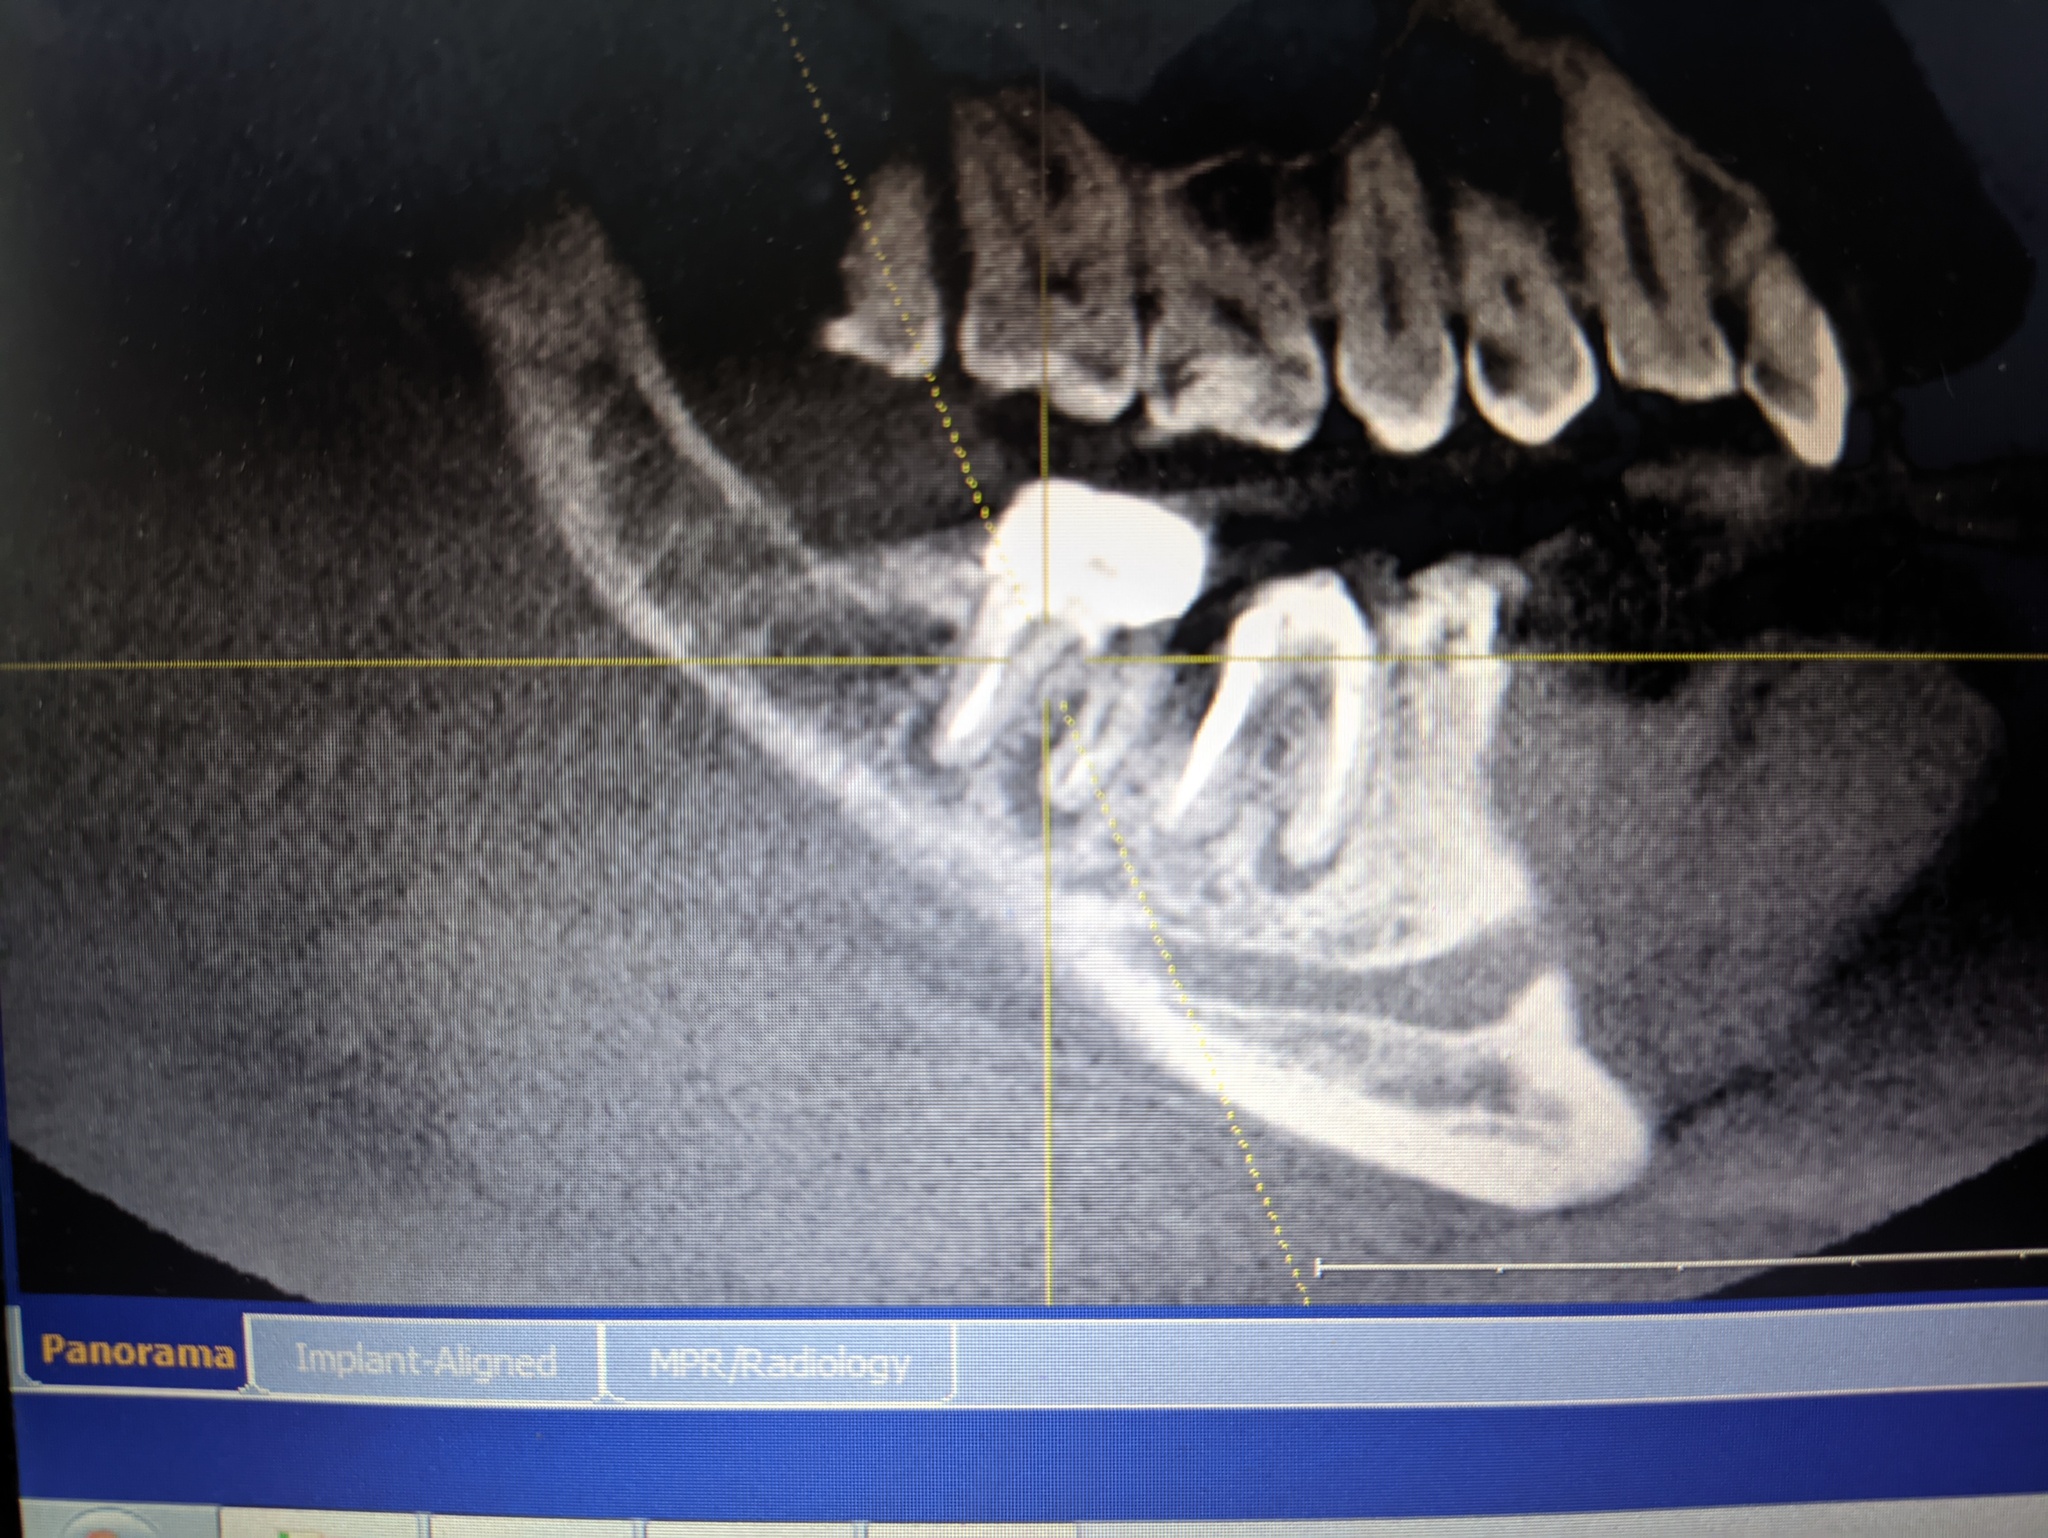 Tooth destruction due to improper treatment and implantation in another clinic - Dentistry, Dental implantation, Error, Orthopedics, CT, No rating